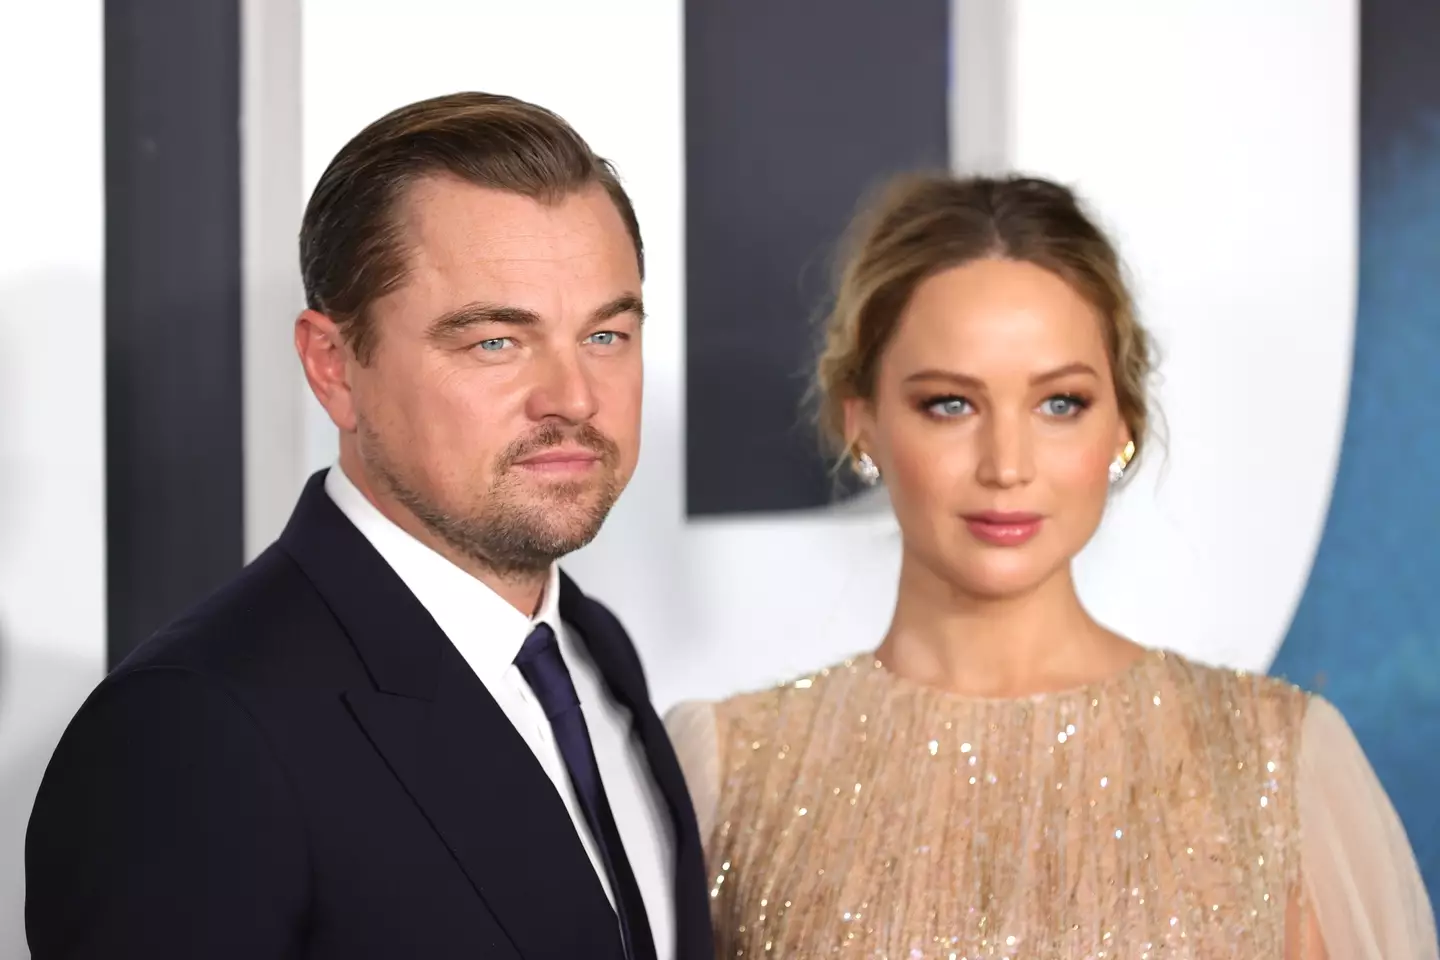 Jennifer Lawrence and Leonardo DiCaprio last paired up in 2021’s Don’t Look Up. (Dia Dipasupil/FilmMagic)